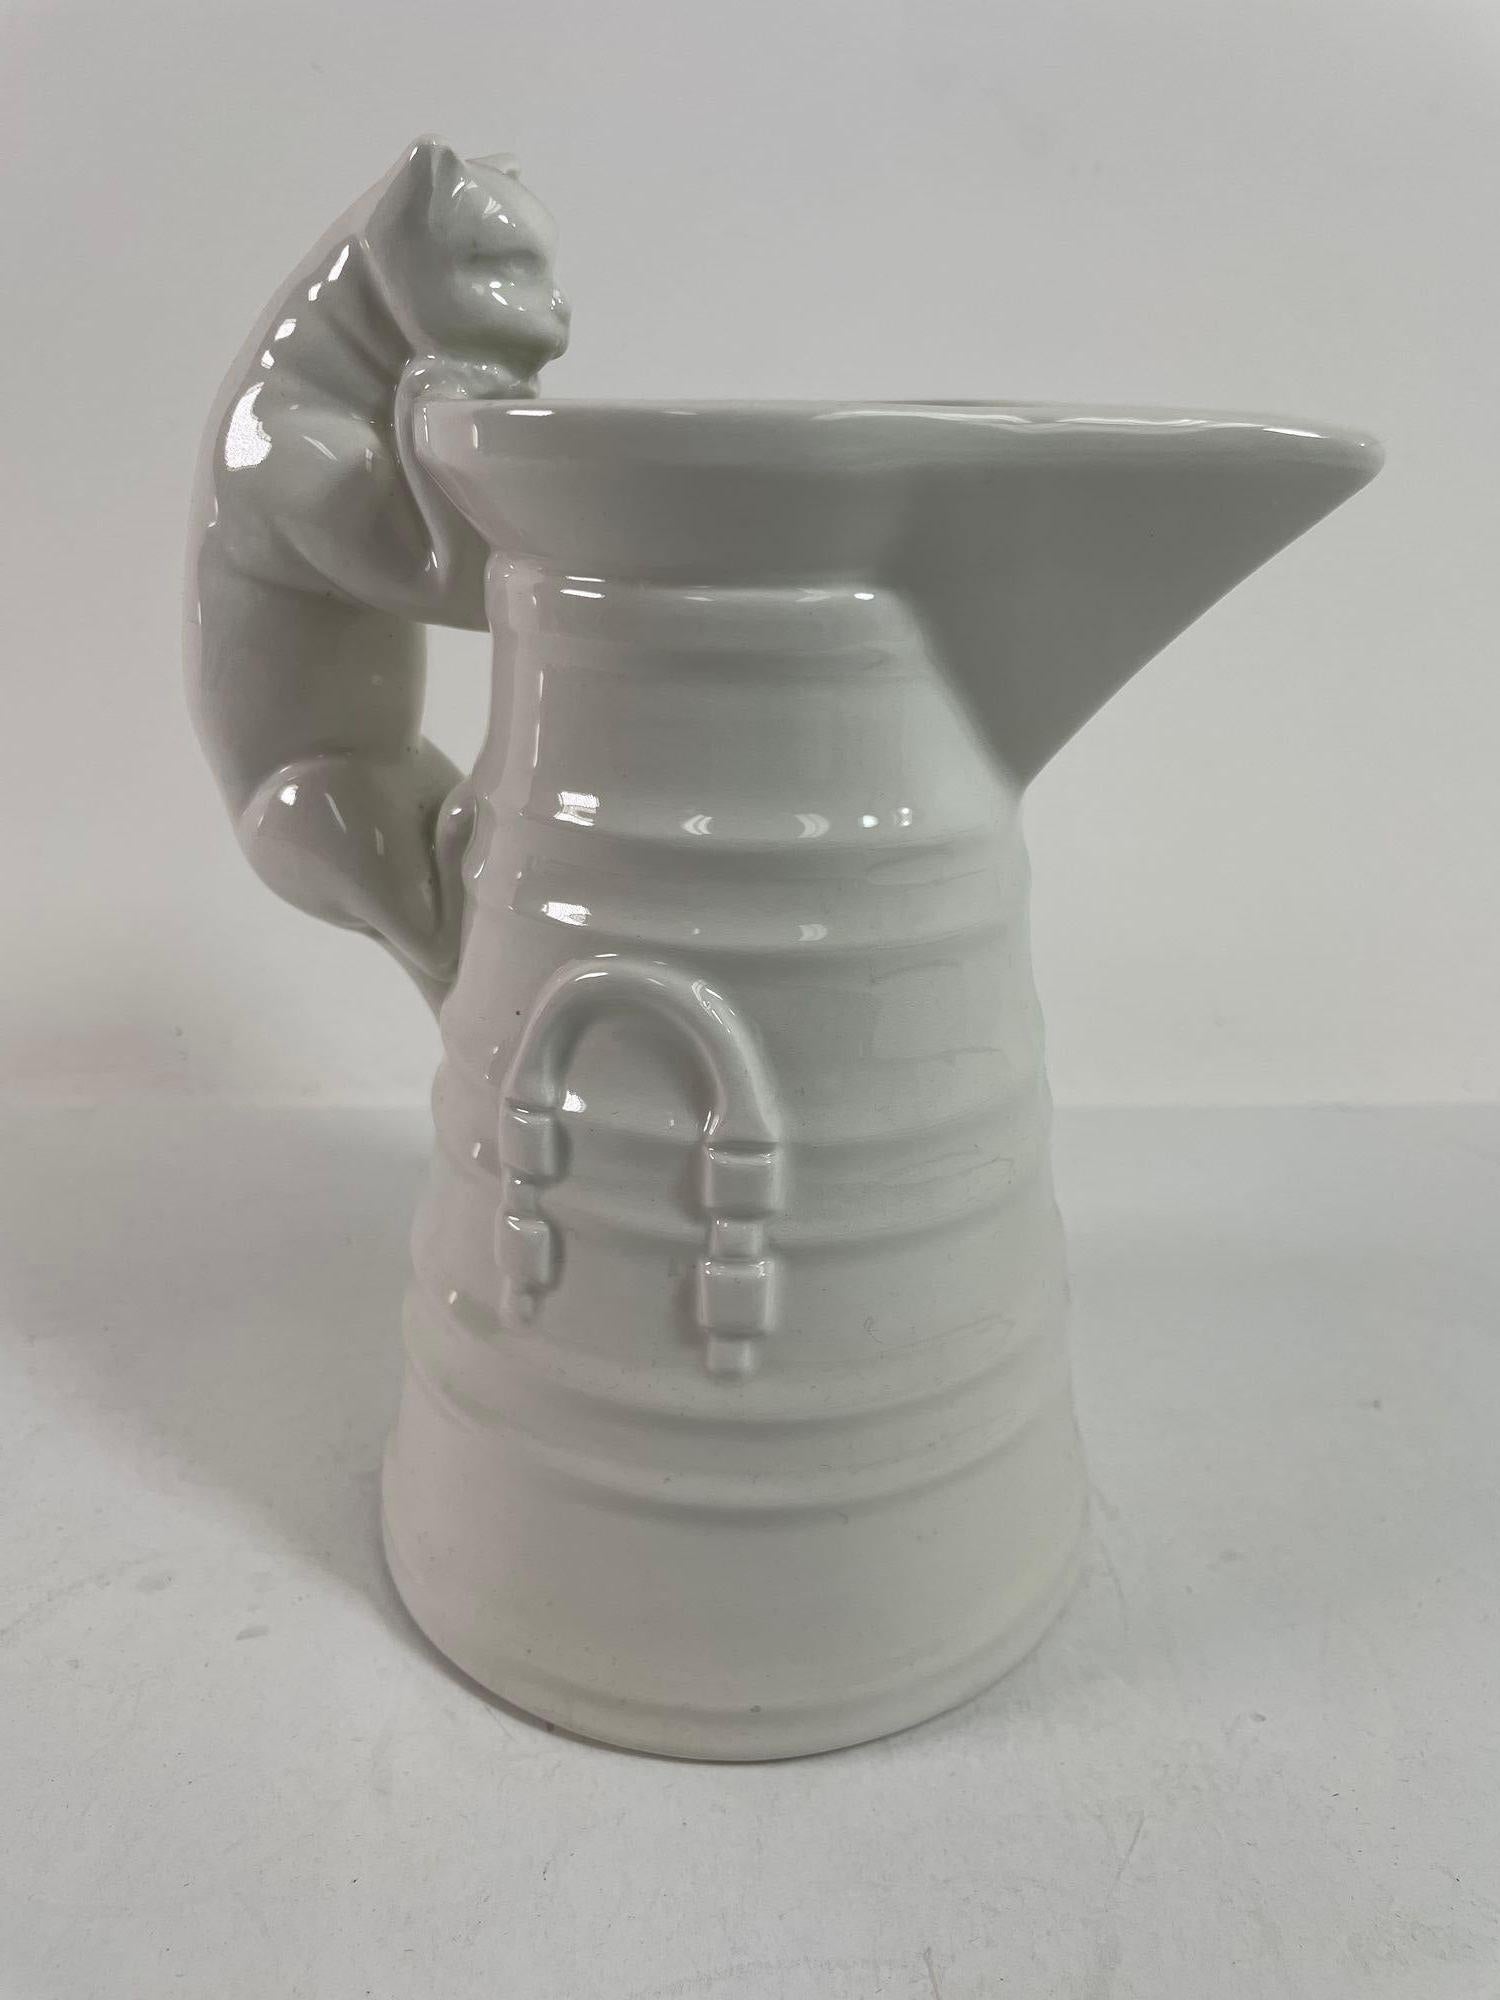 Vintage White Porcelain Cat Pitcher Made in Italy.
Mid 20th Century white cat that got the cream jug.
Victorian style jug of a cat looking over the edge of milk churn.
Made after the Victorian English Spode Copeland cream milk jug with cat handle,